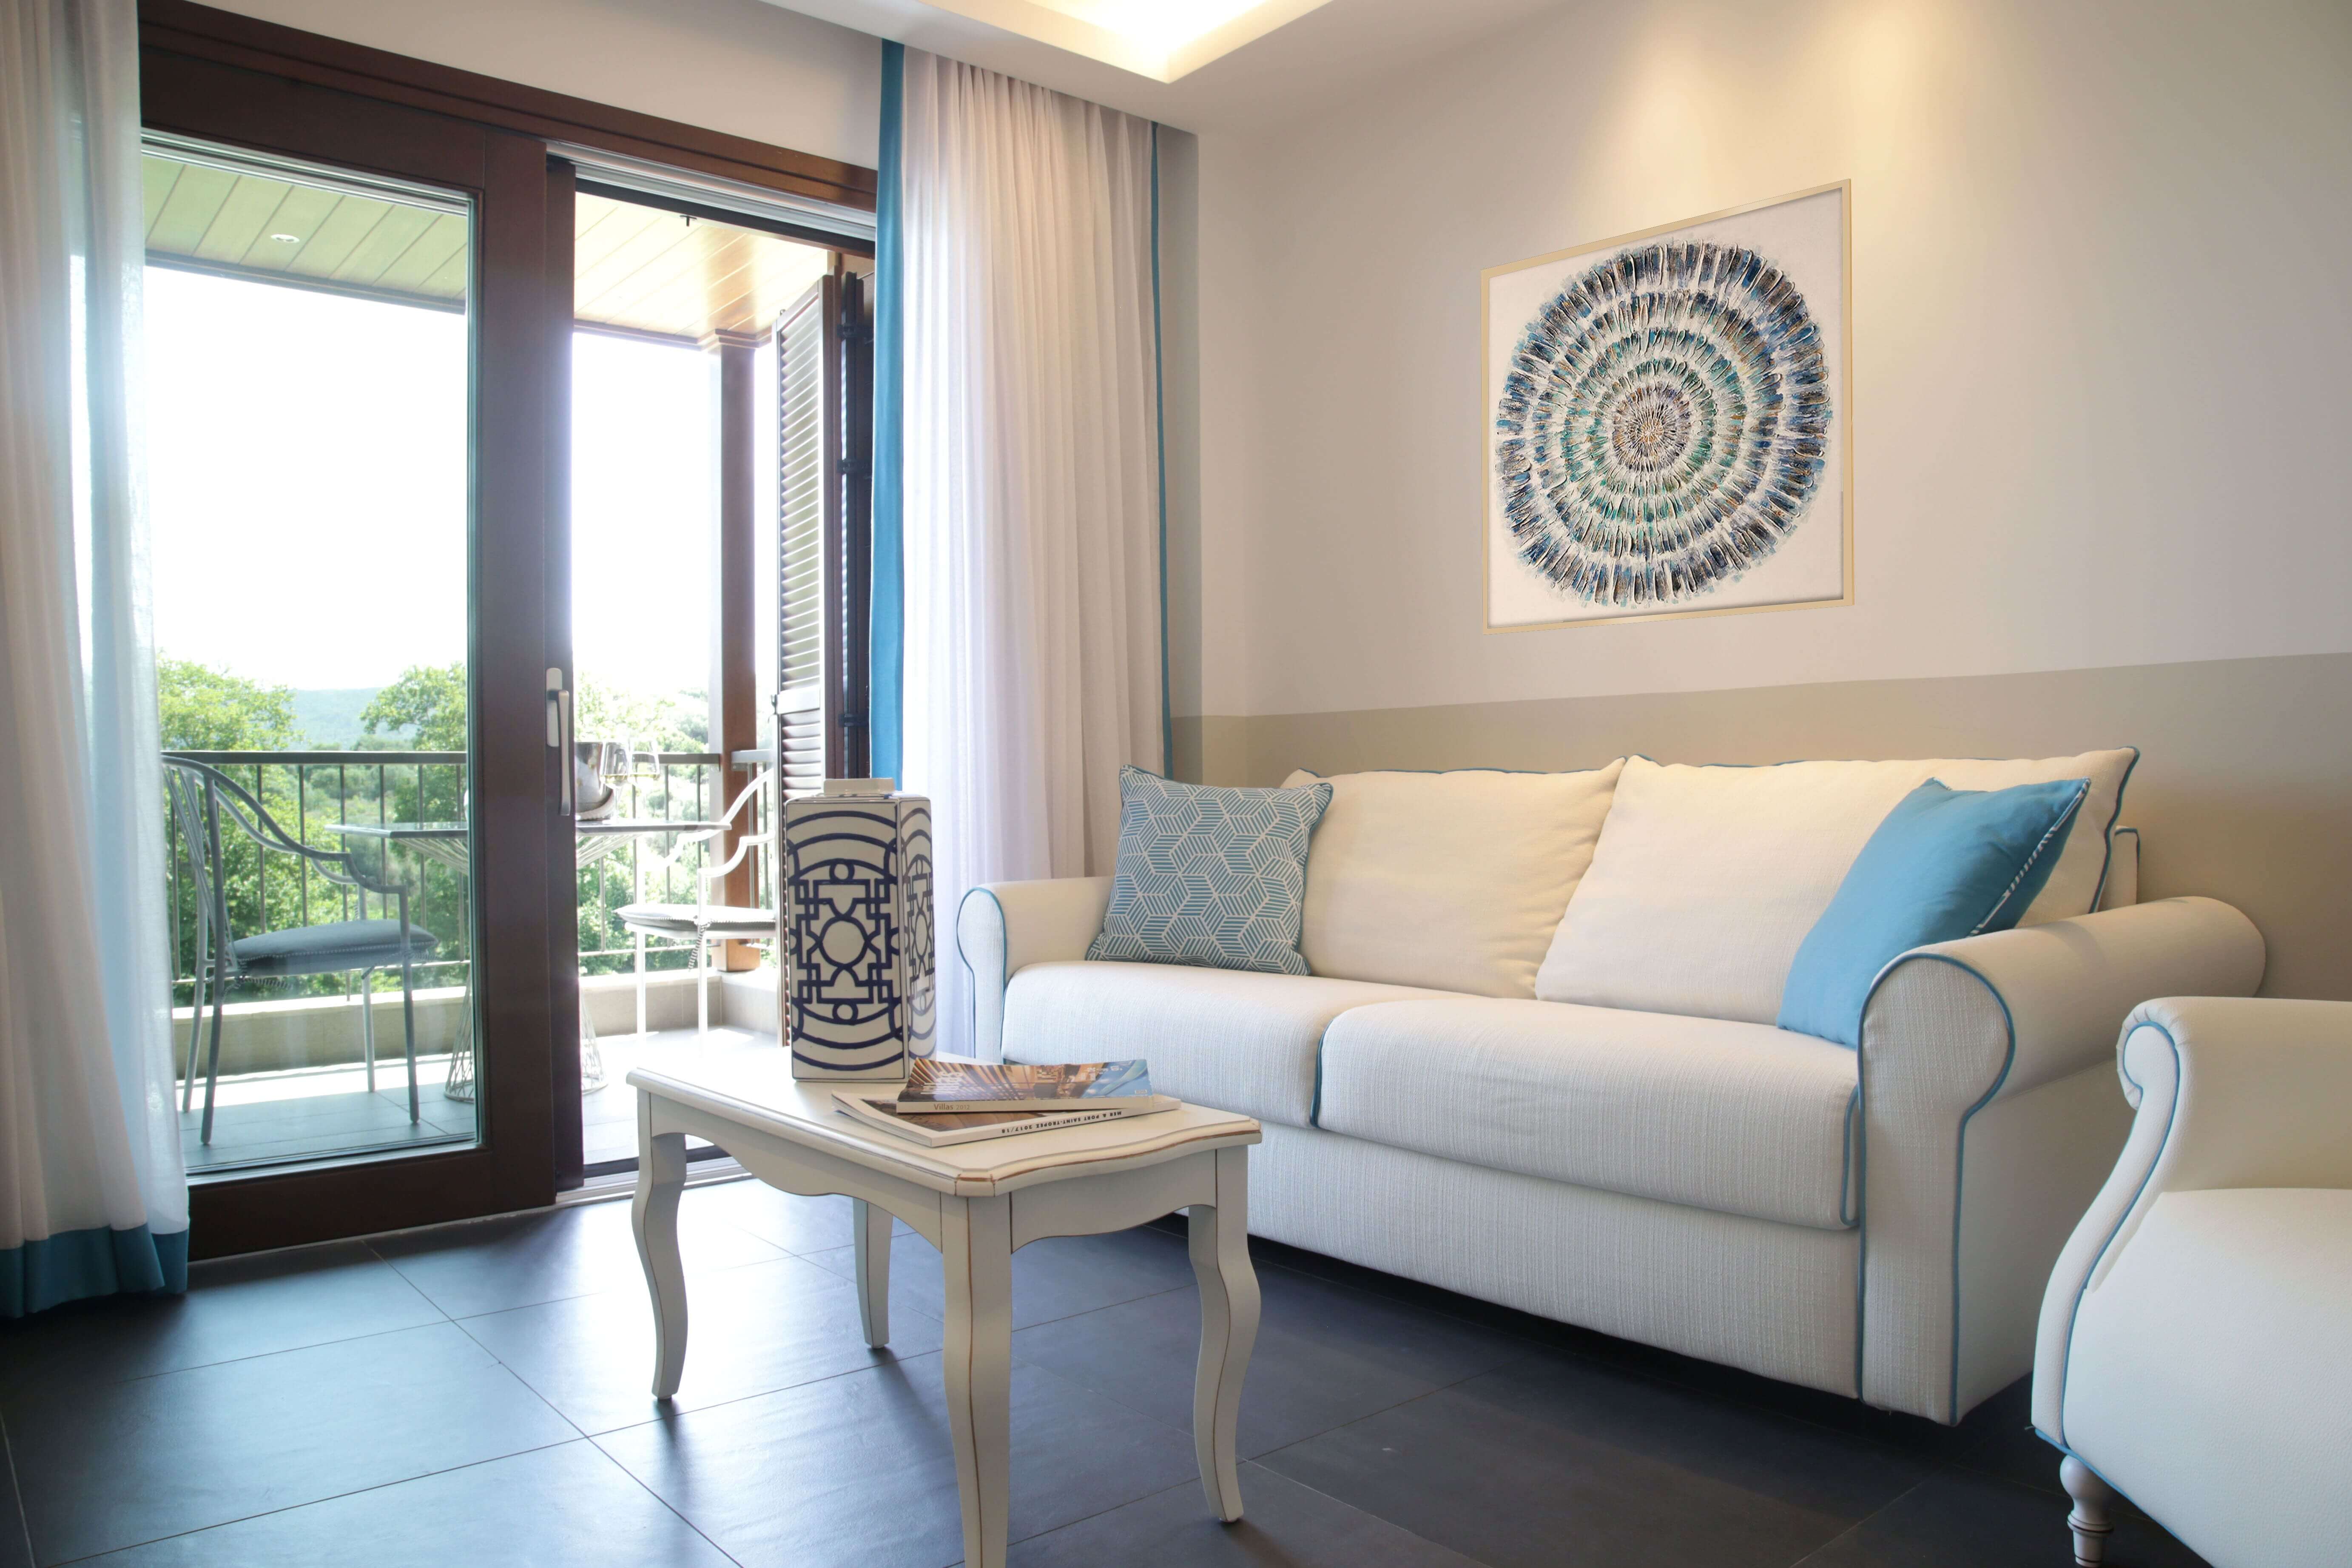 The interior of the Avaton luxury relais & châteaux hotel and villas in Halkidiki